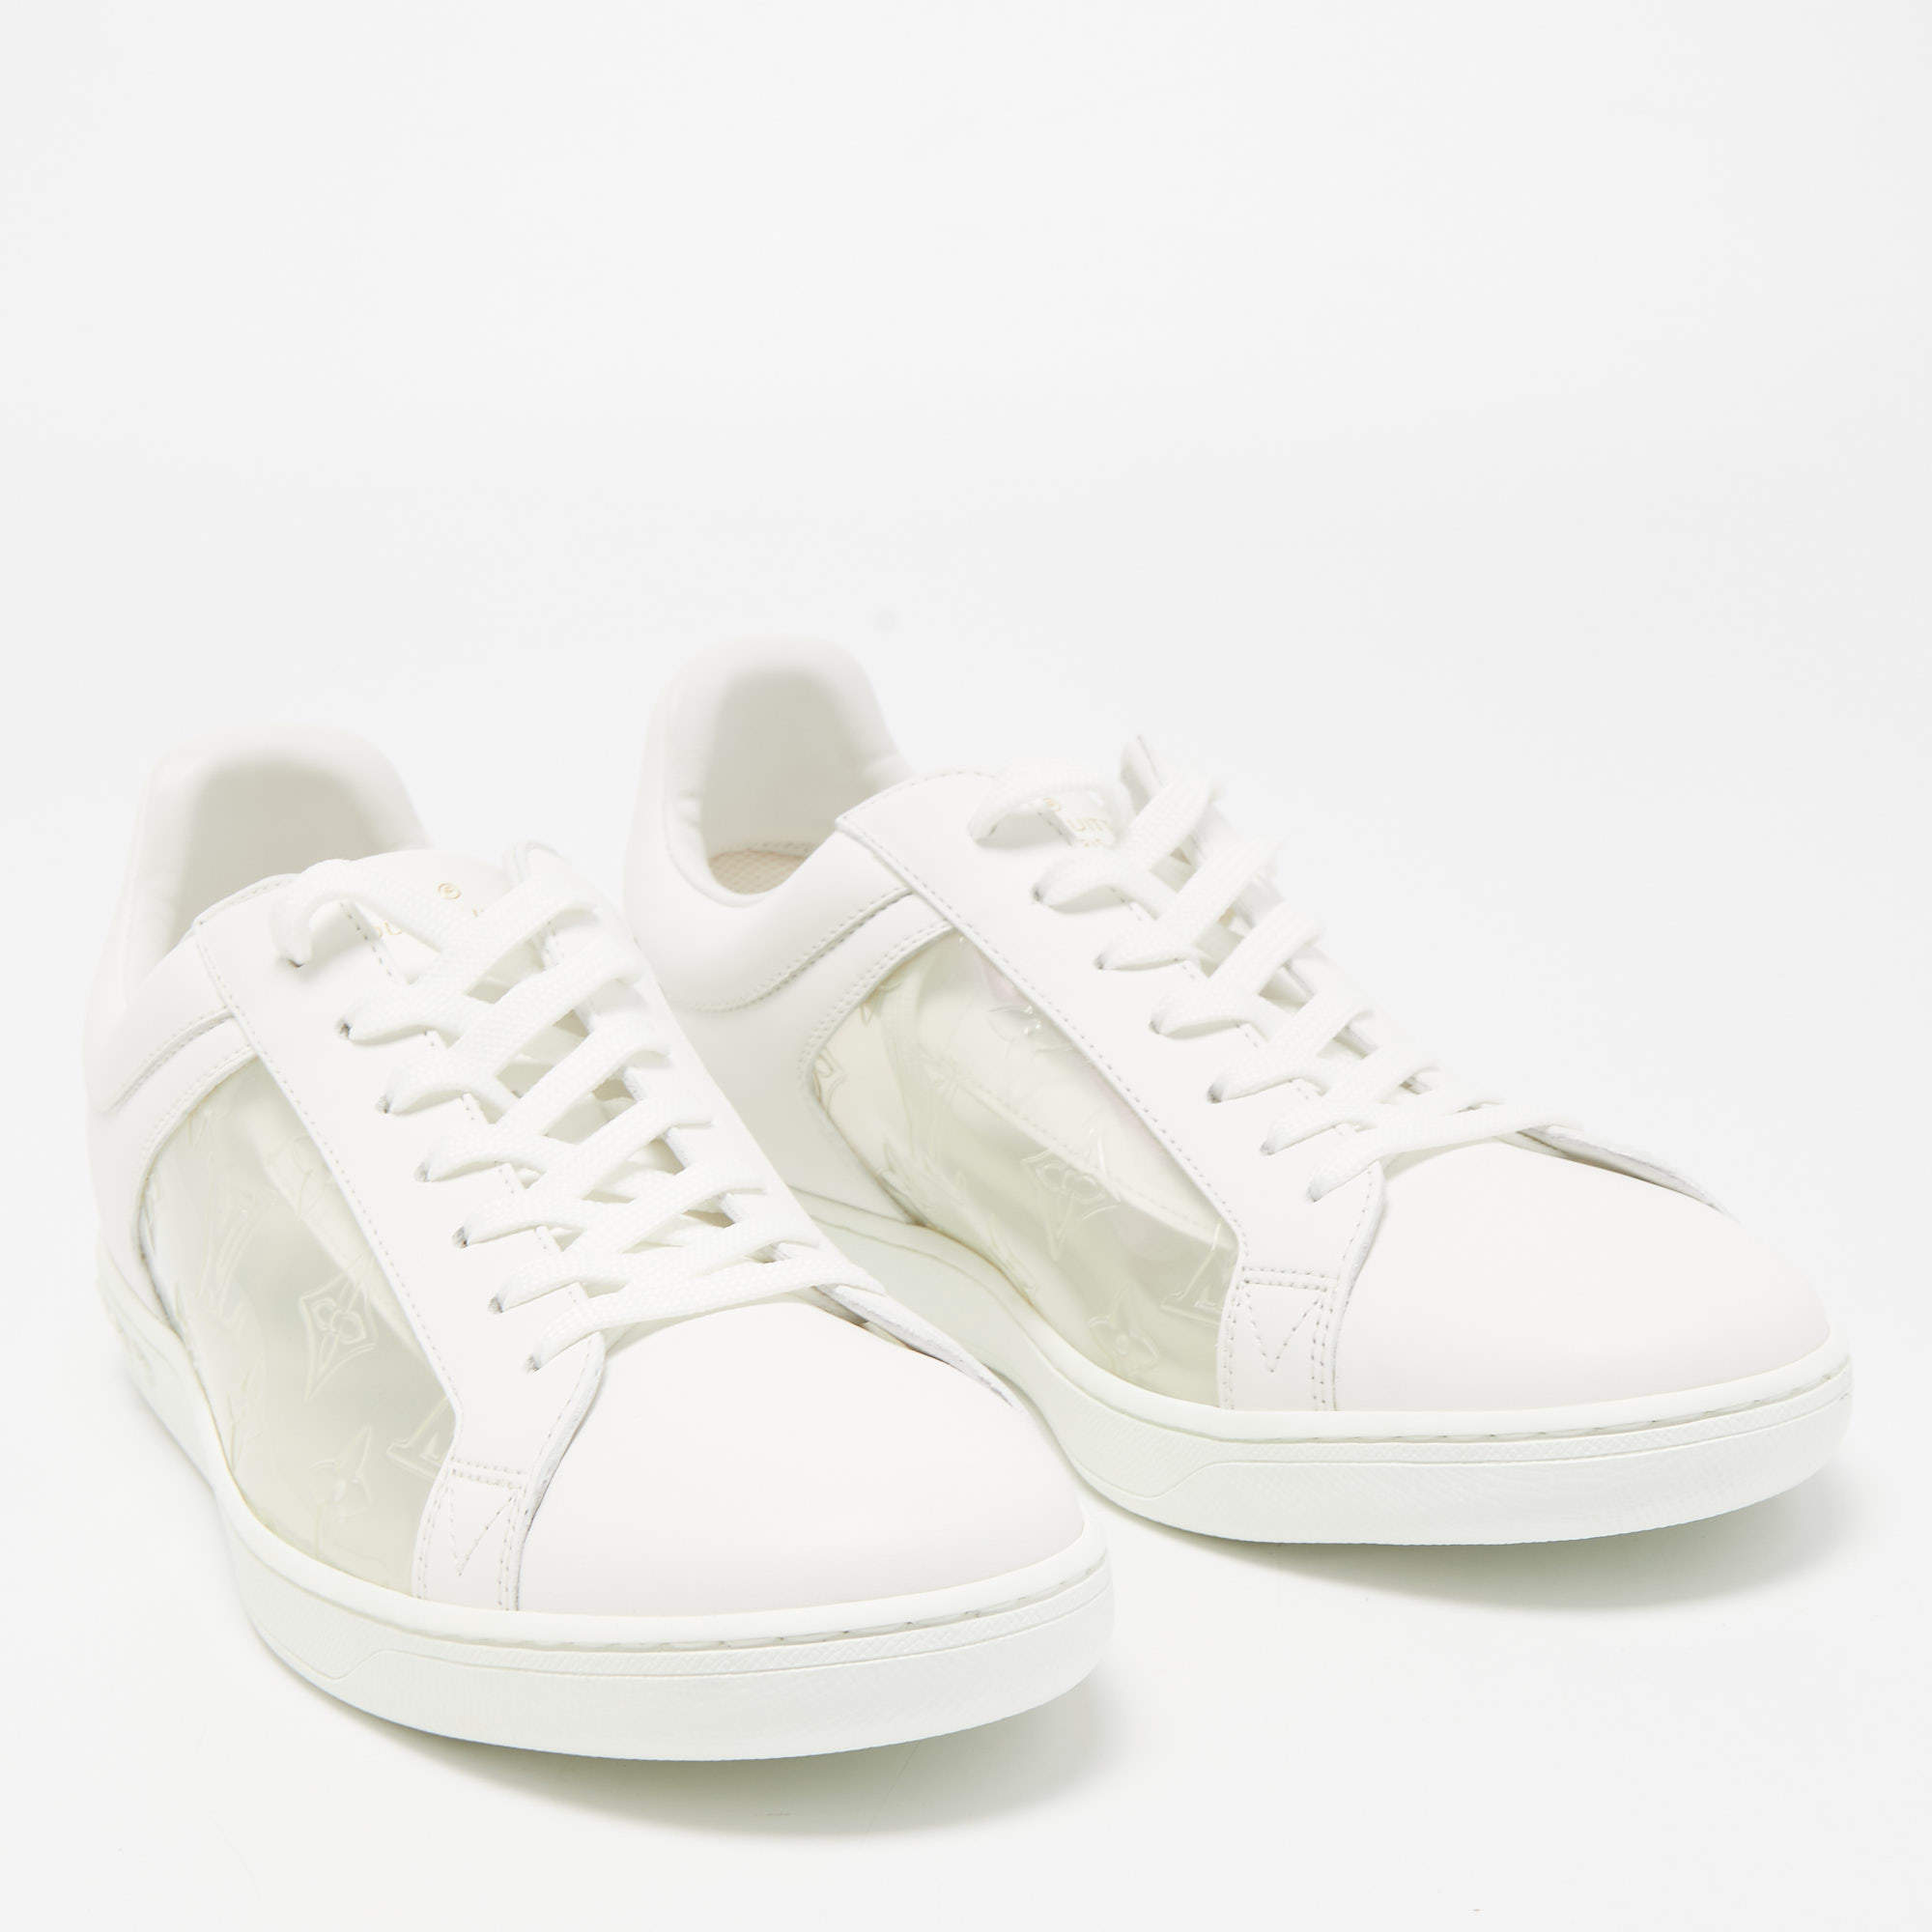 Louis Vuitton White/Transparent PVC and Leather Low Top Sneakers Size 41.5 Louis  Vuitton